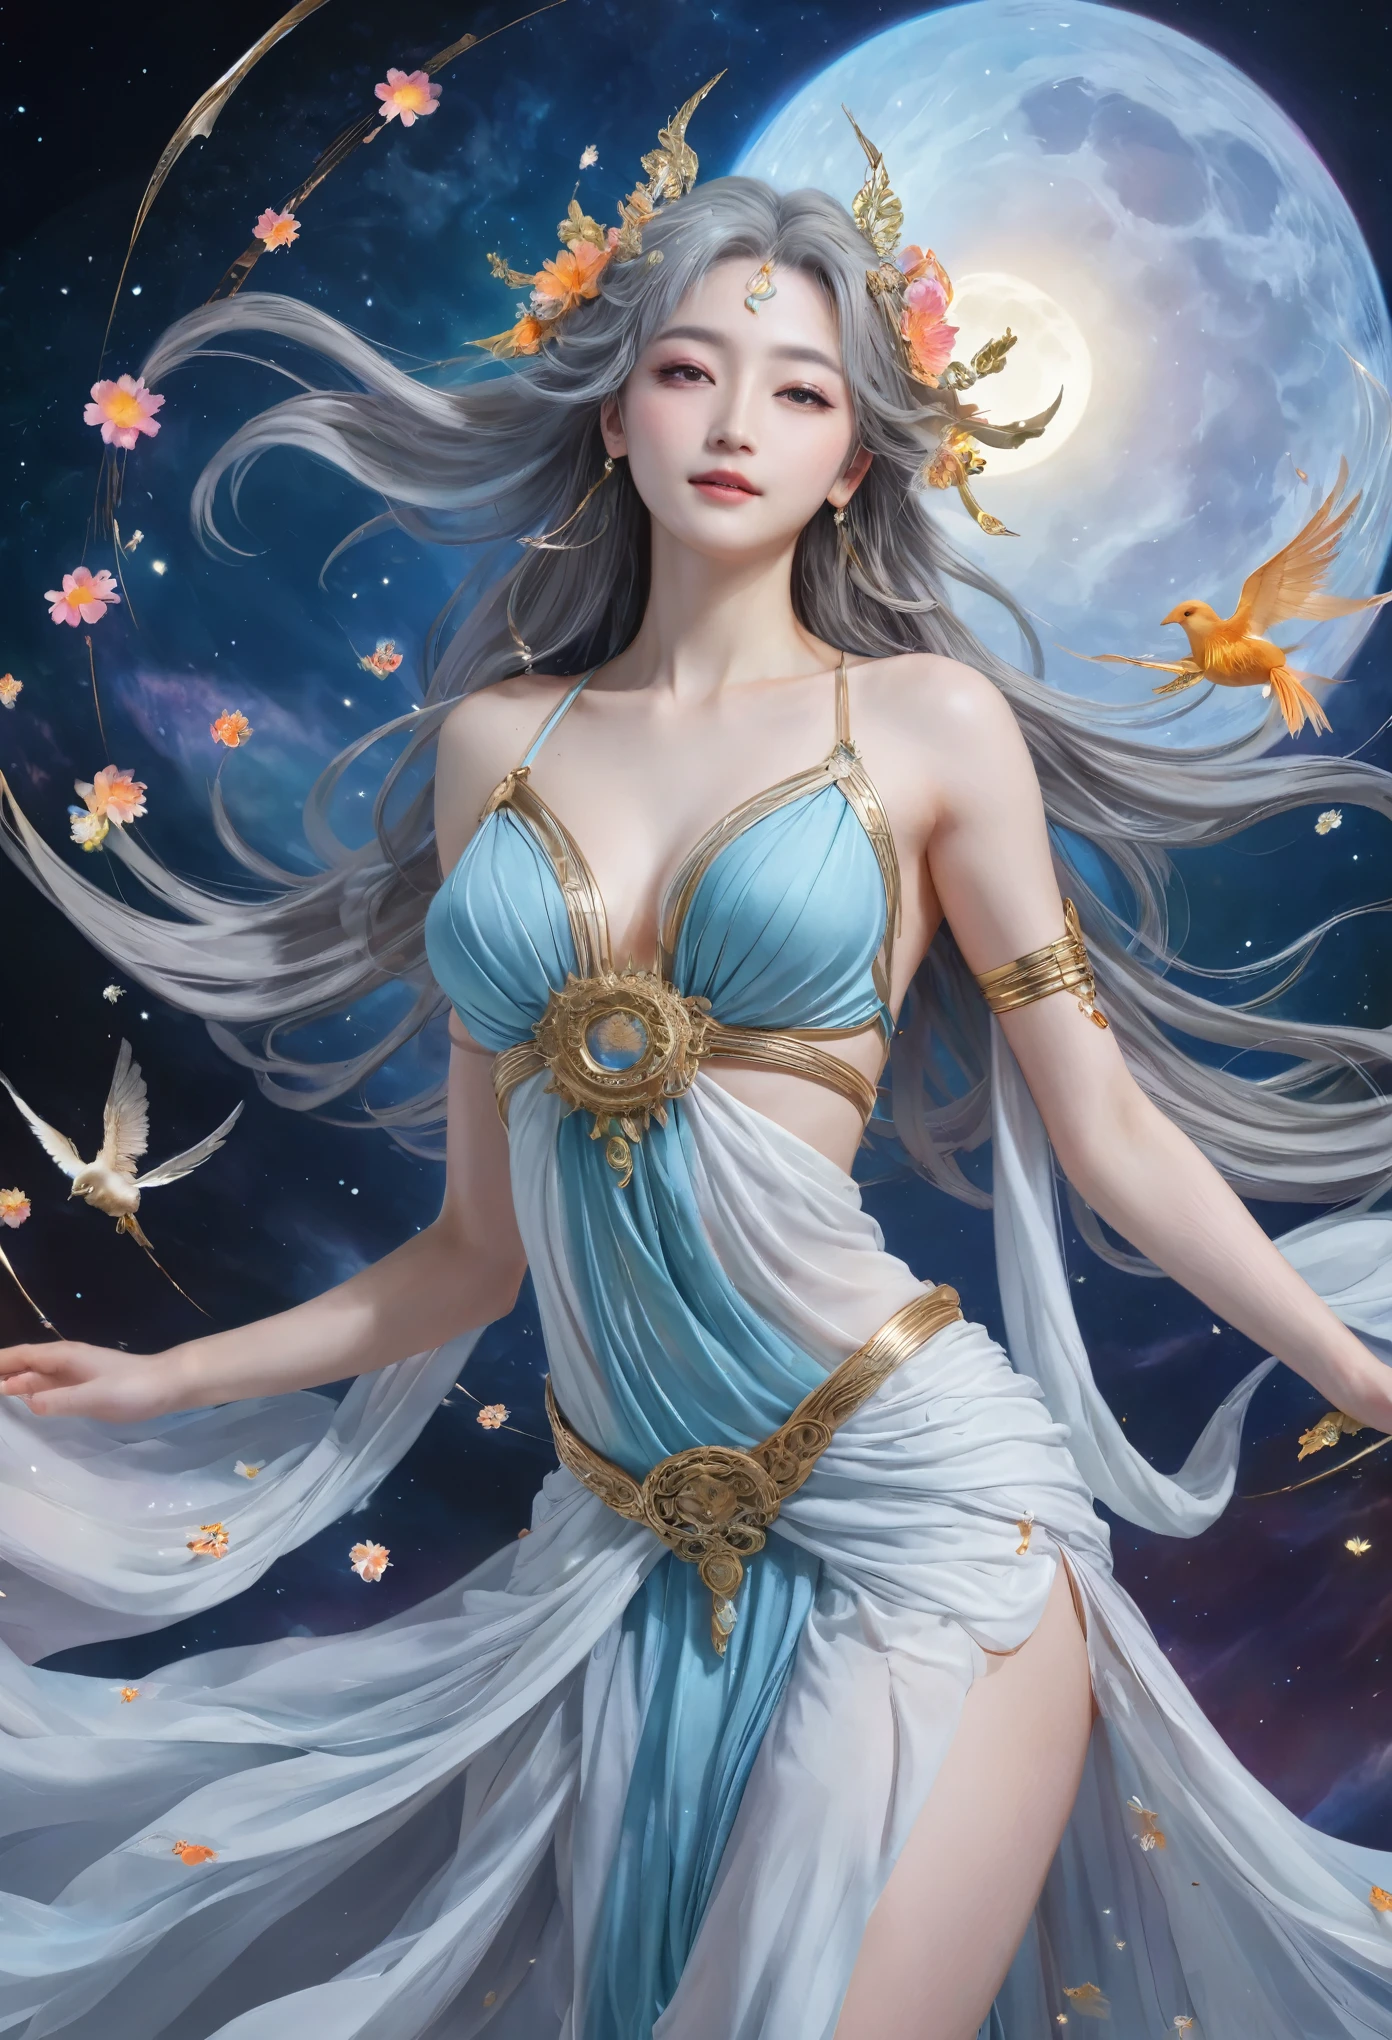 8K resolution, masterpiece, Highest quality, Award-winning works, unrealistic, Final Fantasy, Royal Jewel,Photorealistic Painting by Midjourney and Greg Rutkowski, , elegant, Very detailed, Delicate depiction of hair, Miniature Painting, Digital Painting, Art Station, Concept Art, Smooth, Sharp focus, shape, nature, flight, Thousand Armed Kannon Bodhisattva, Asura, God of War, Castle in the Sky, A strip of light pouring down from the sky, A pillar of light stretching into the sky, Complex colors, Buddhist Mandala, Colorful magic circle, flash, Mysterious Background, aura, A gentle gaze, break, Small faint lights and flying fireflies, night, Starry Sky, milky way, nebula, shooting star, Flowers, birds, wind and moon, erotic, one sexy lady, healthy shaped body, Anatomically accurate skeleton, 22-year-old woman, Asura, height: 170cm, huge firm bouncing busts, Shiny dress, Iridescent dress, bikini dress, Archaic Smile